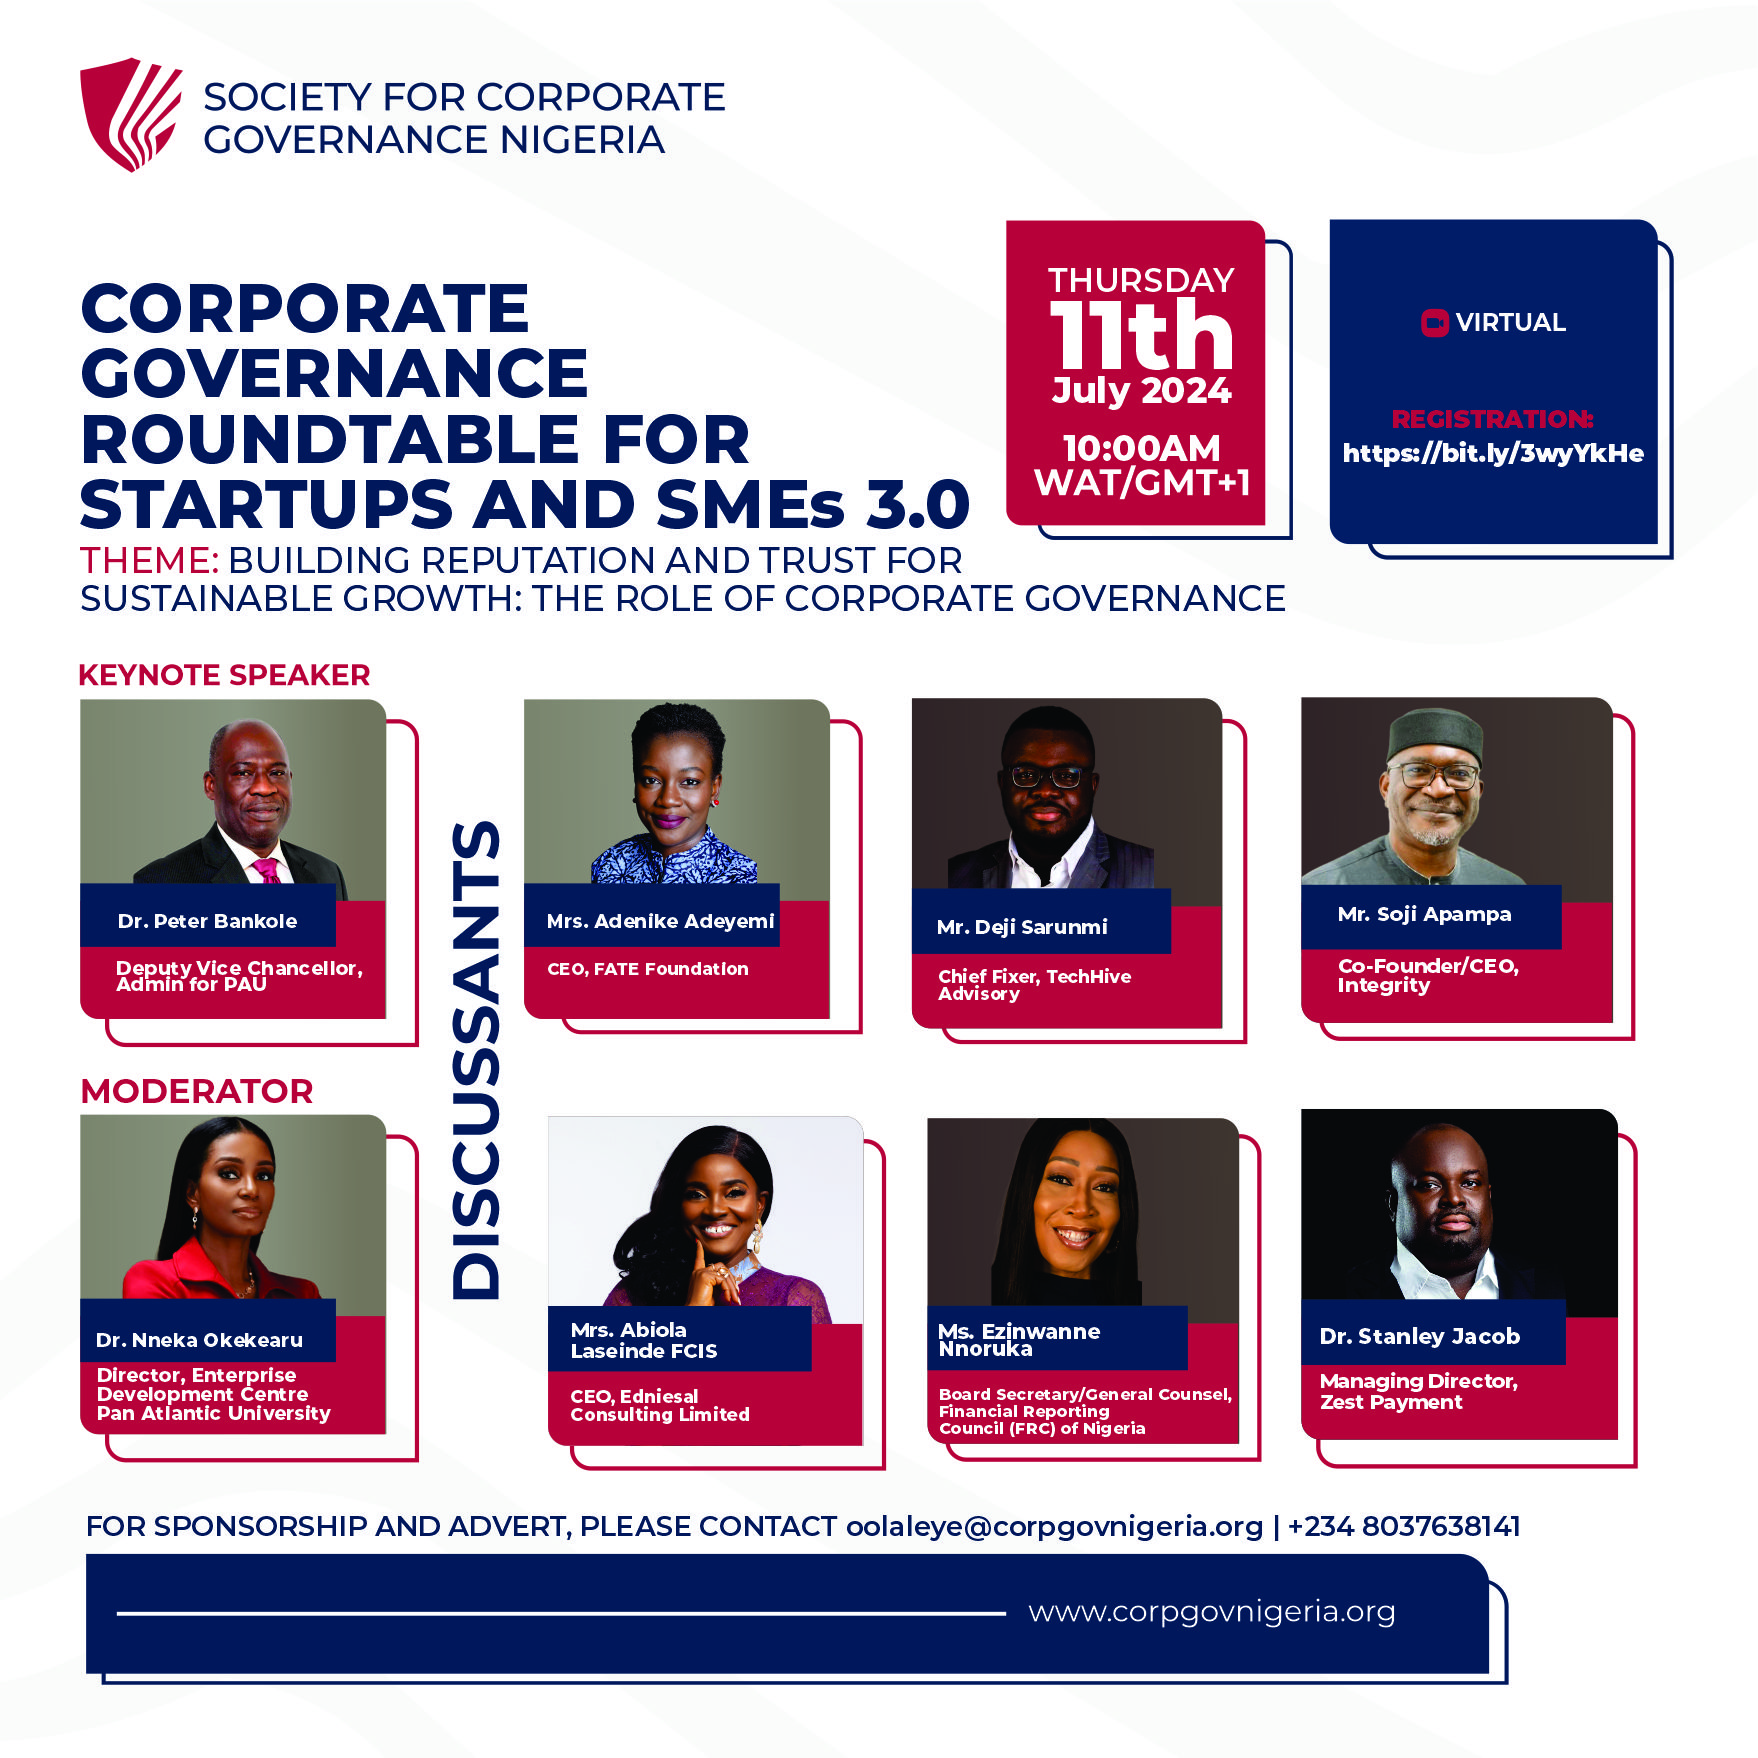 Corporate Governance Roundtable for Startups/SMEs 3.0